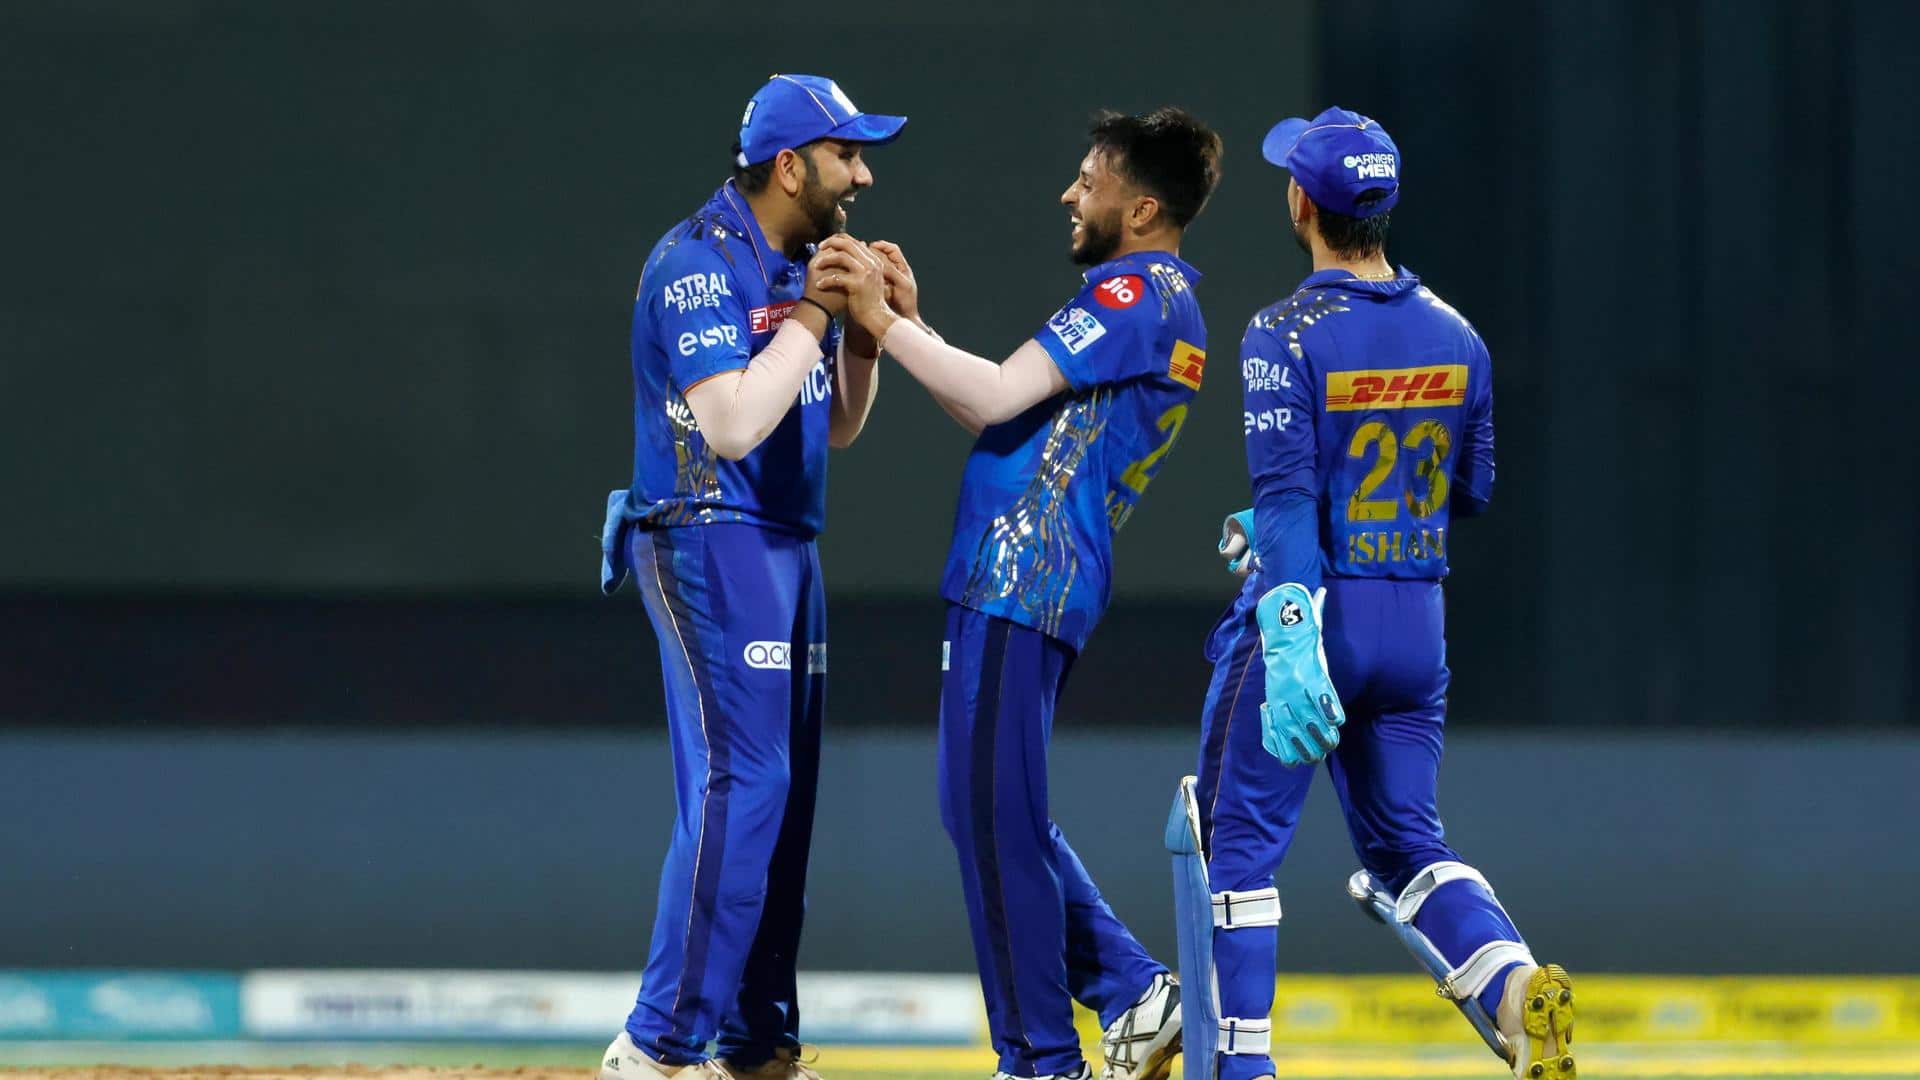 Decoding best bowling spells for Mumbai Indians in IPL